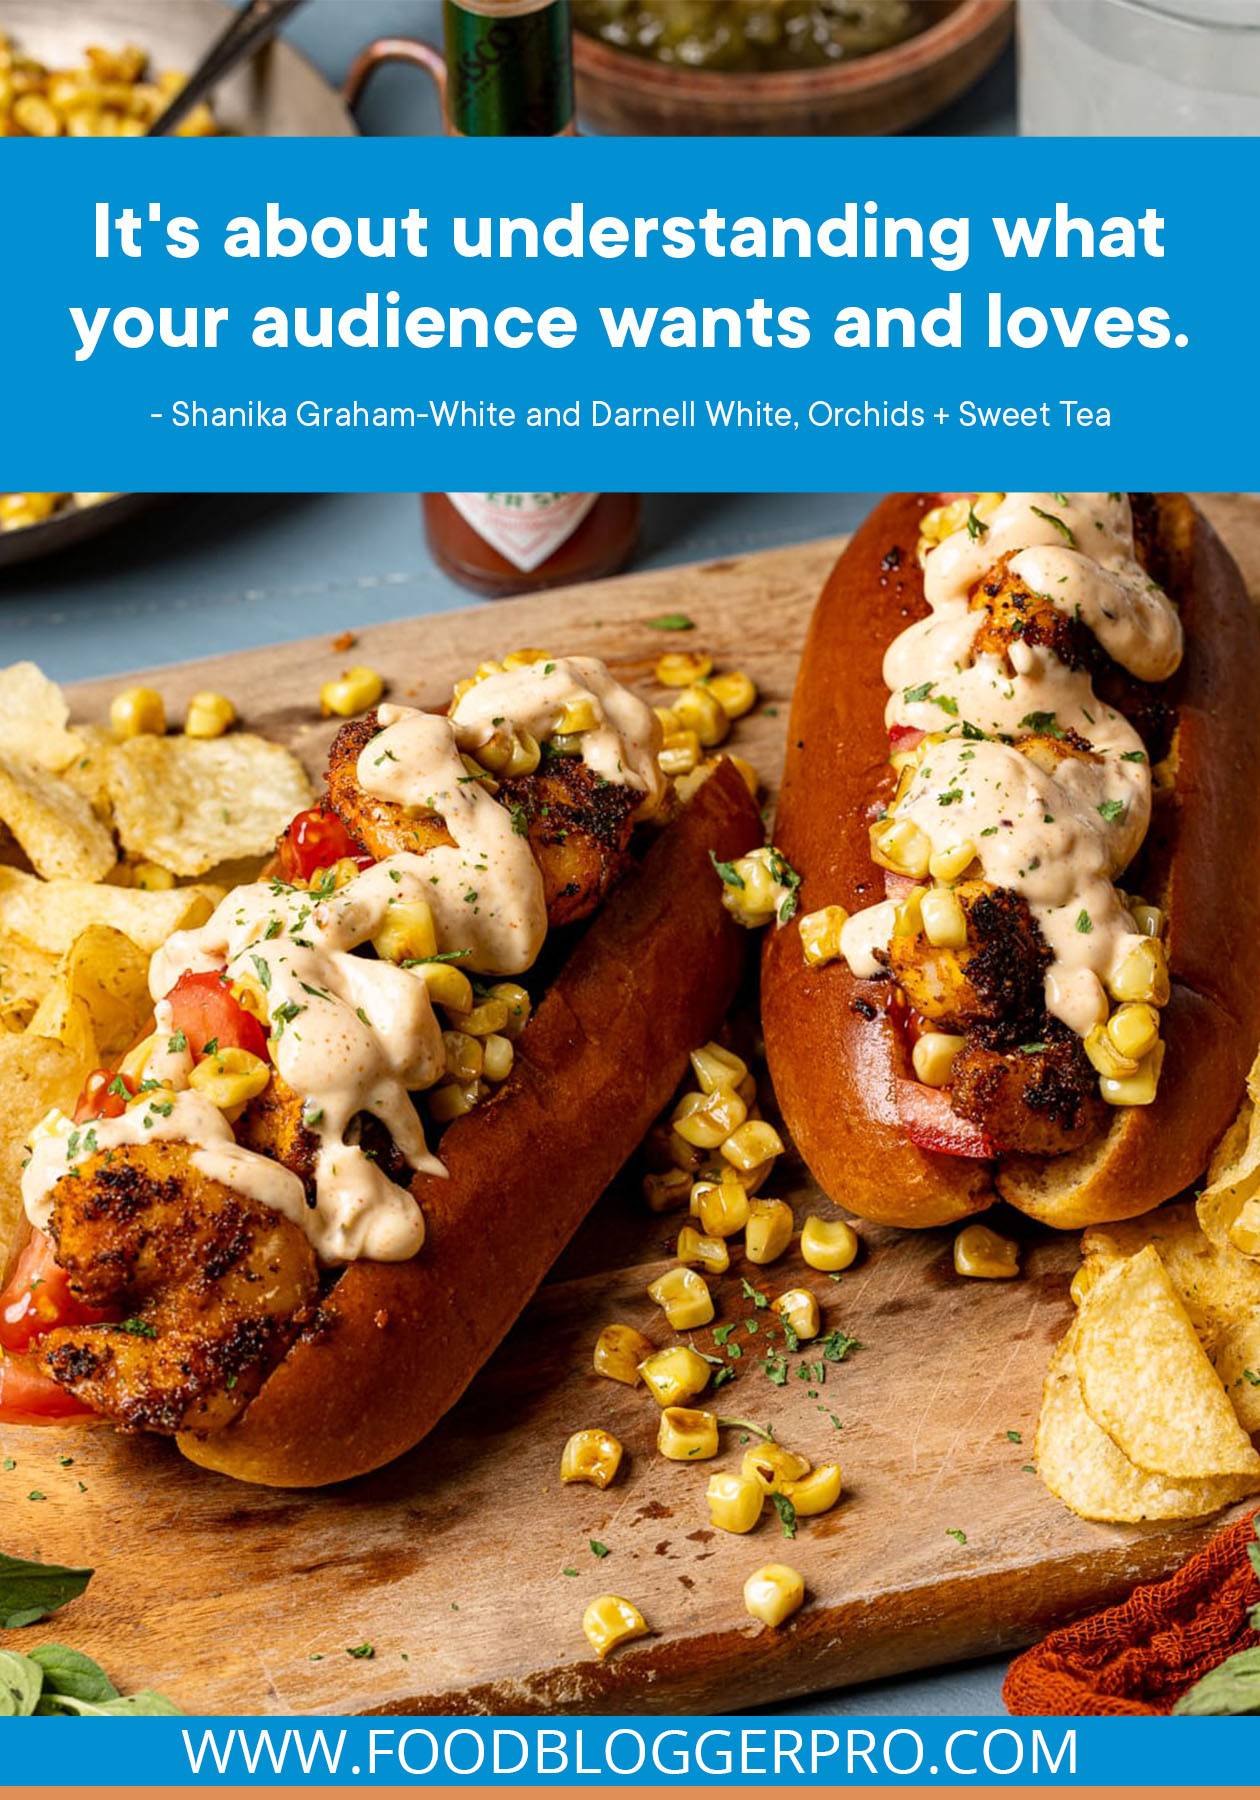 A photograph of shrimp po' boys with a quote from Shanika Graham-White and Darnell White's episode of The Food Blogger Pro Podcast: "It's about understanding what your audience wants and loves."